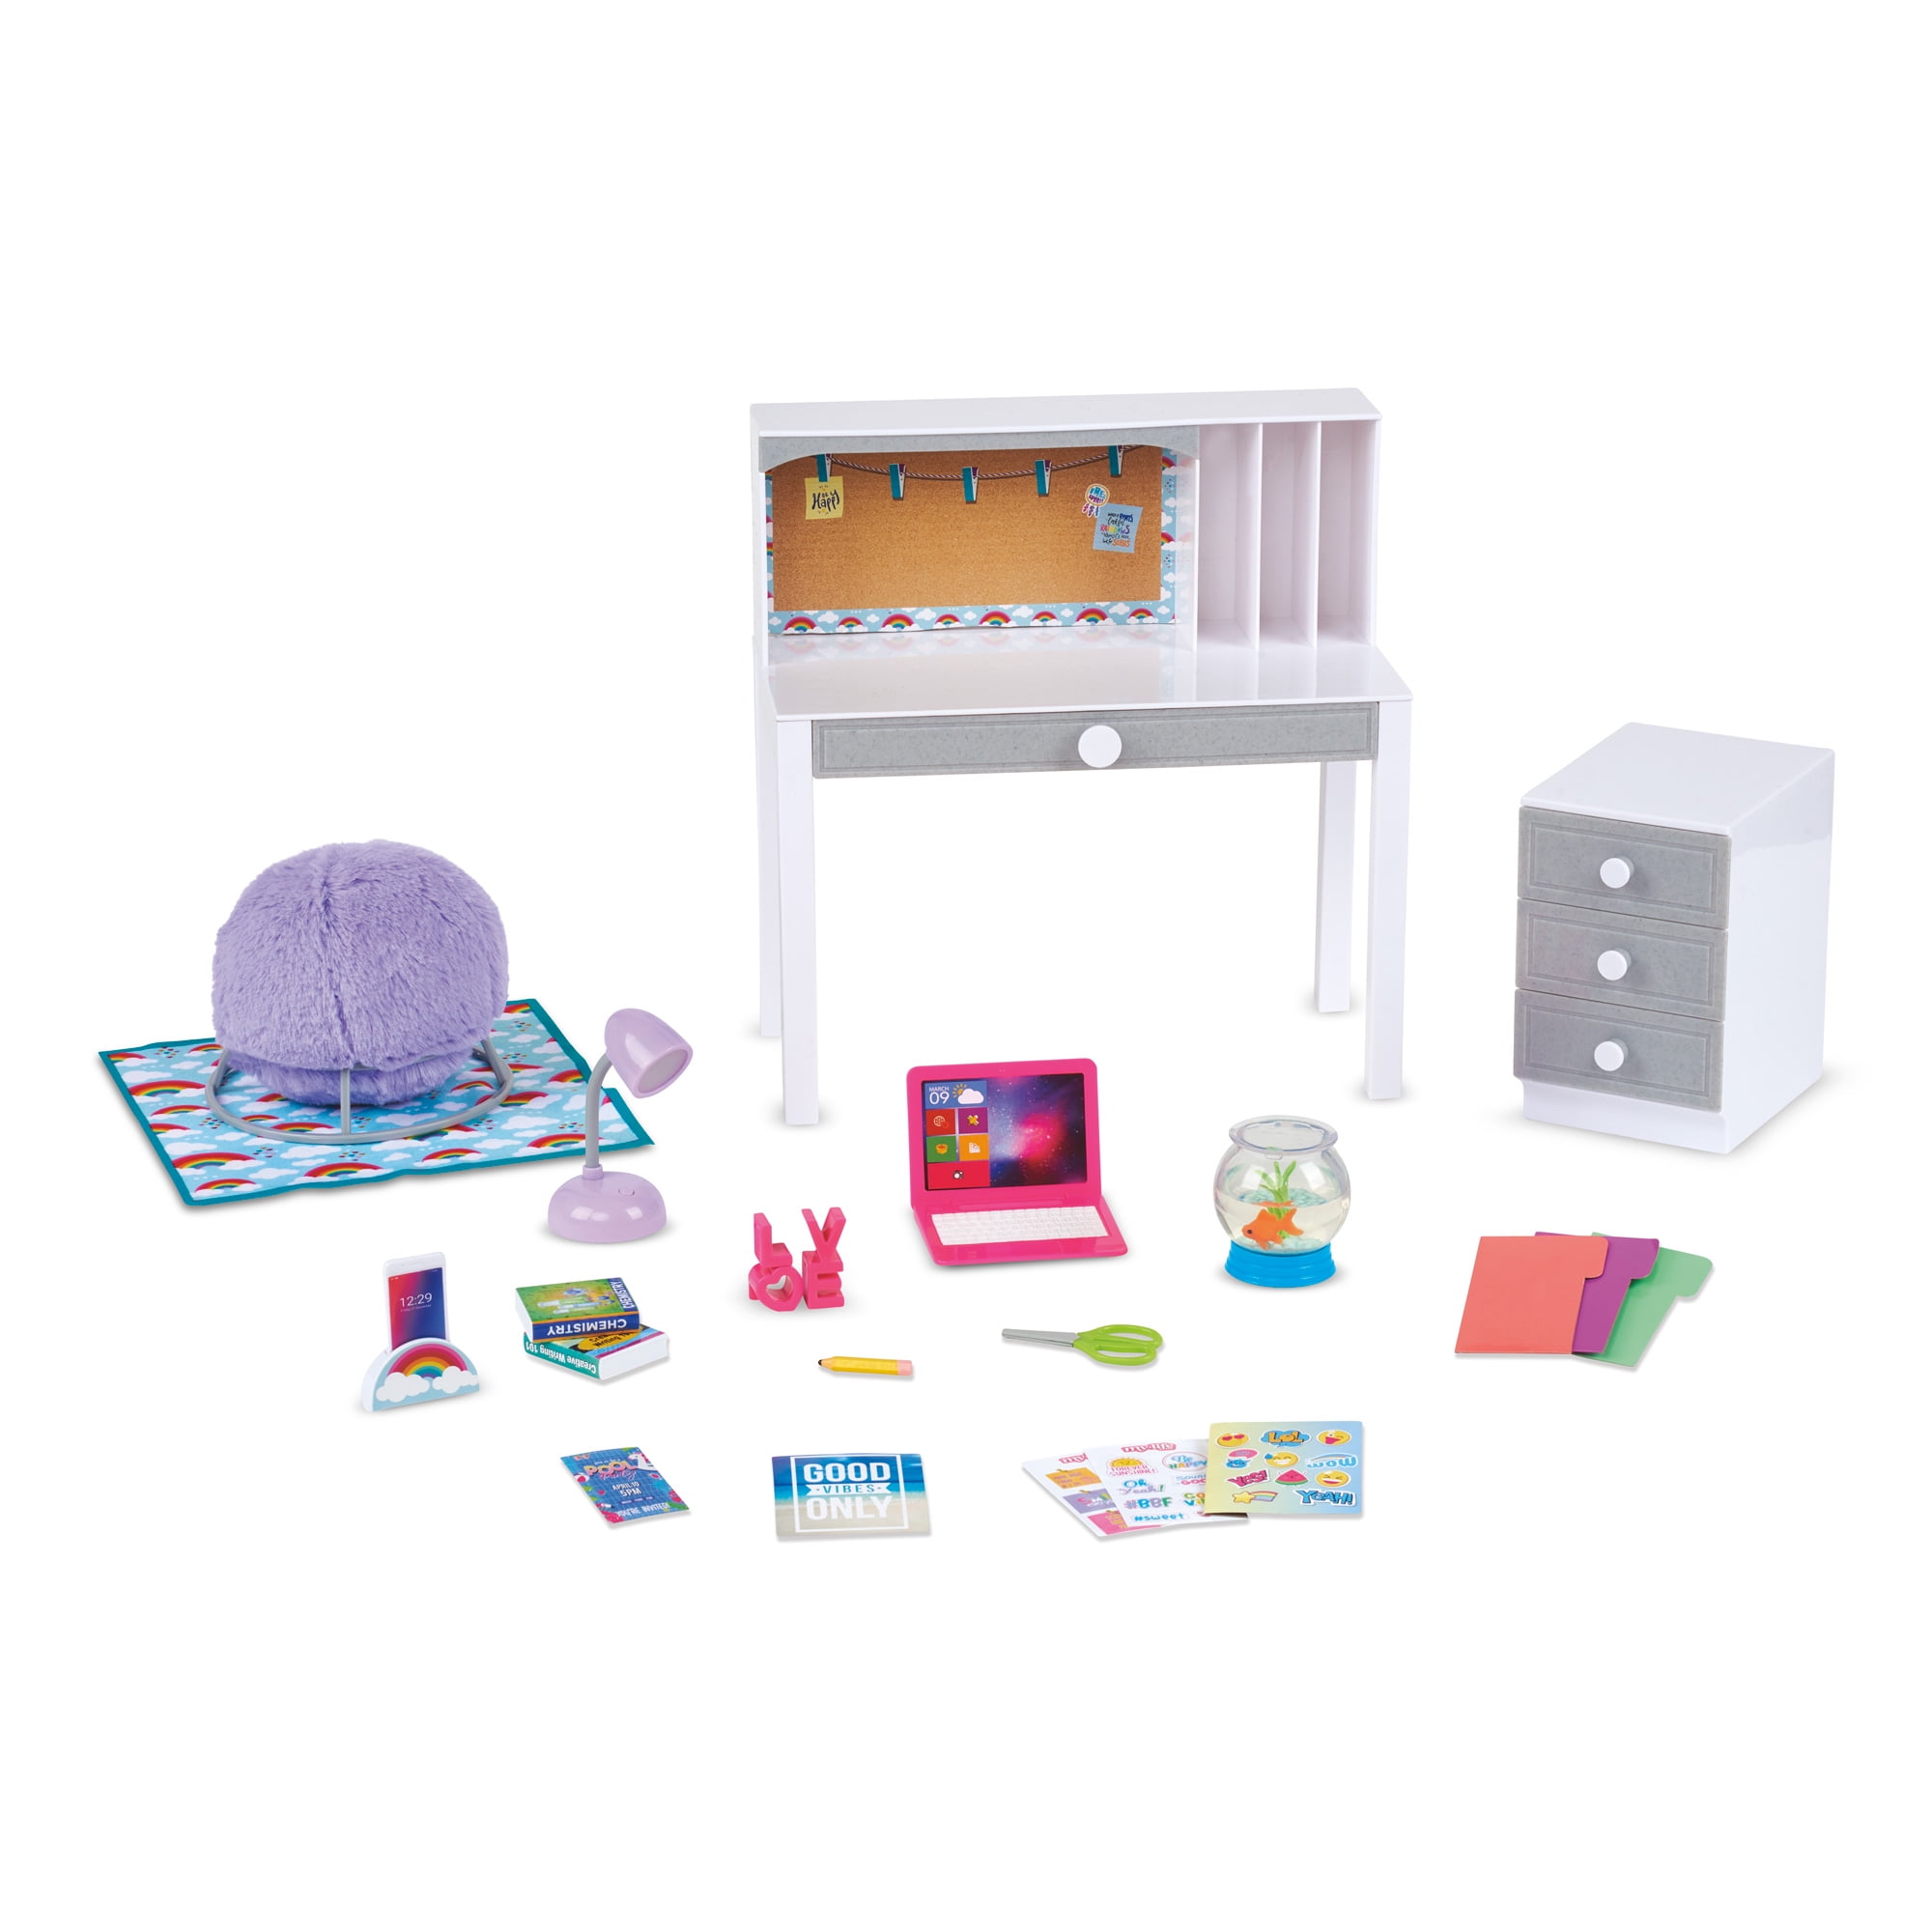 OG Ice Cream Play Set for 18" doll American girl Accessories My life as 14 PC. 